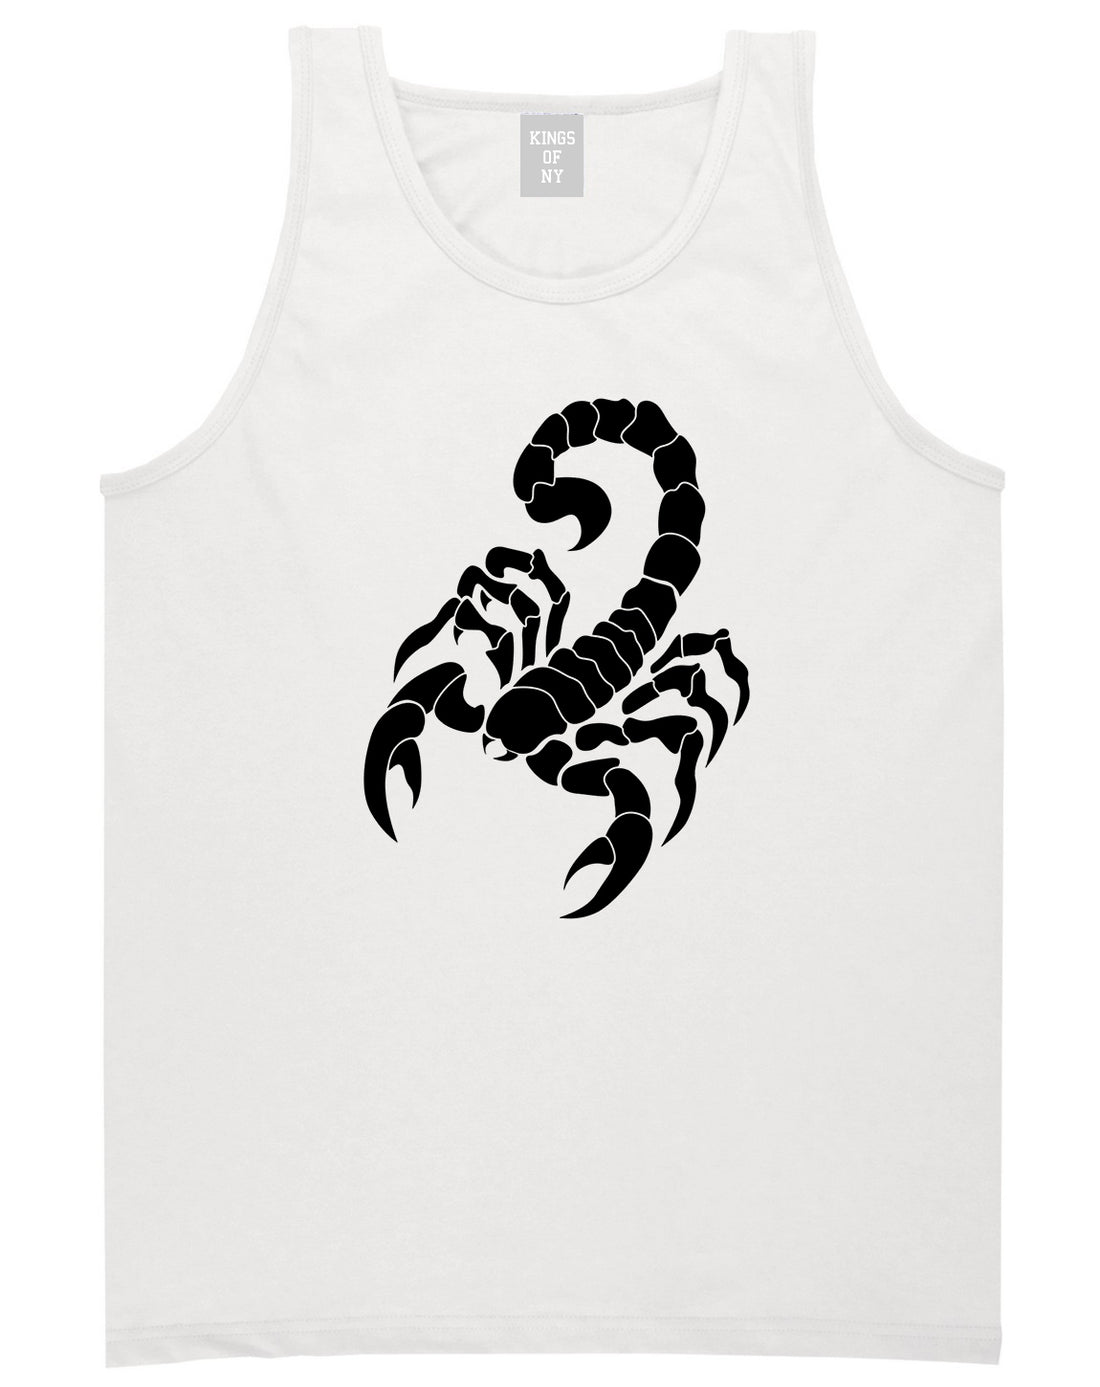 Scorpion Mens Tank Top Shirt White by Kings Of NY